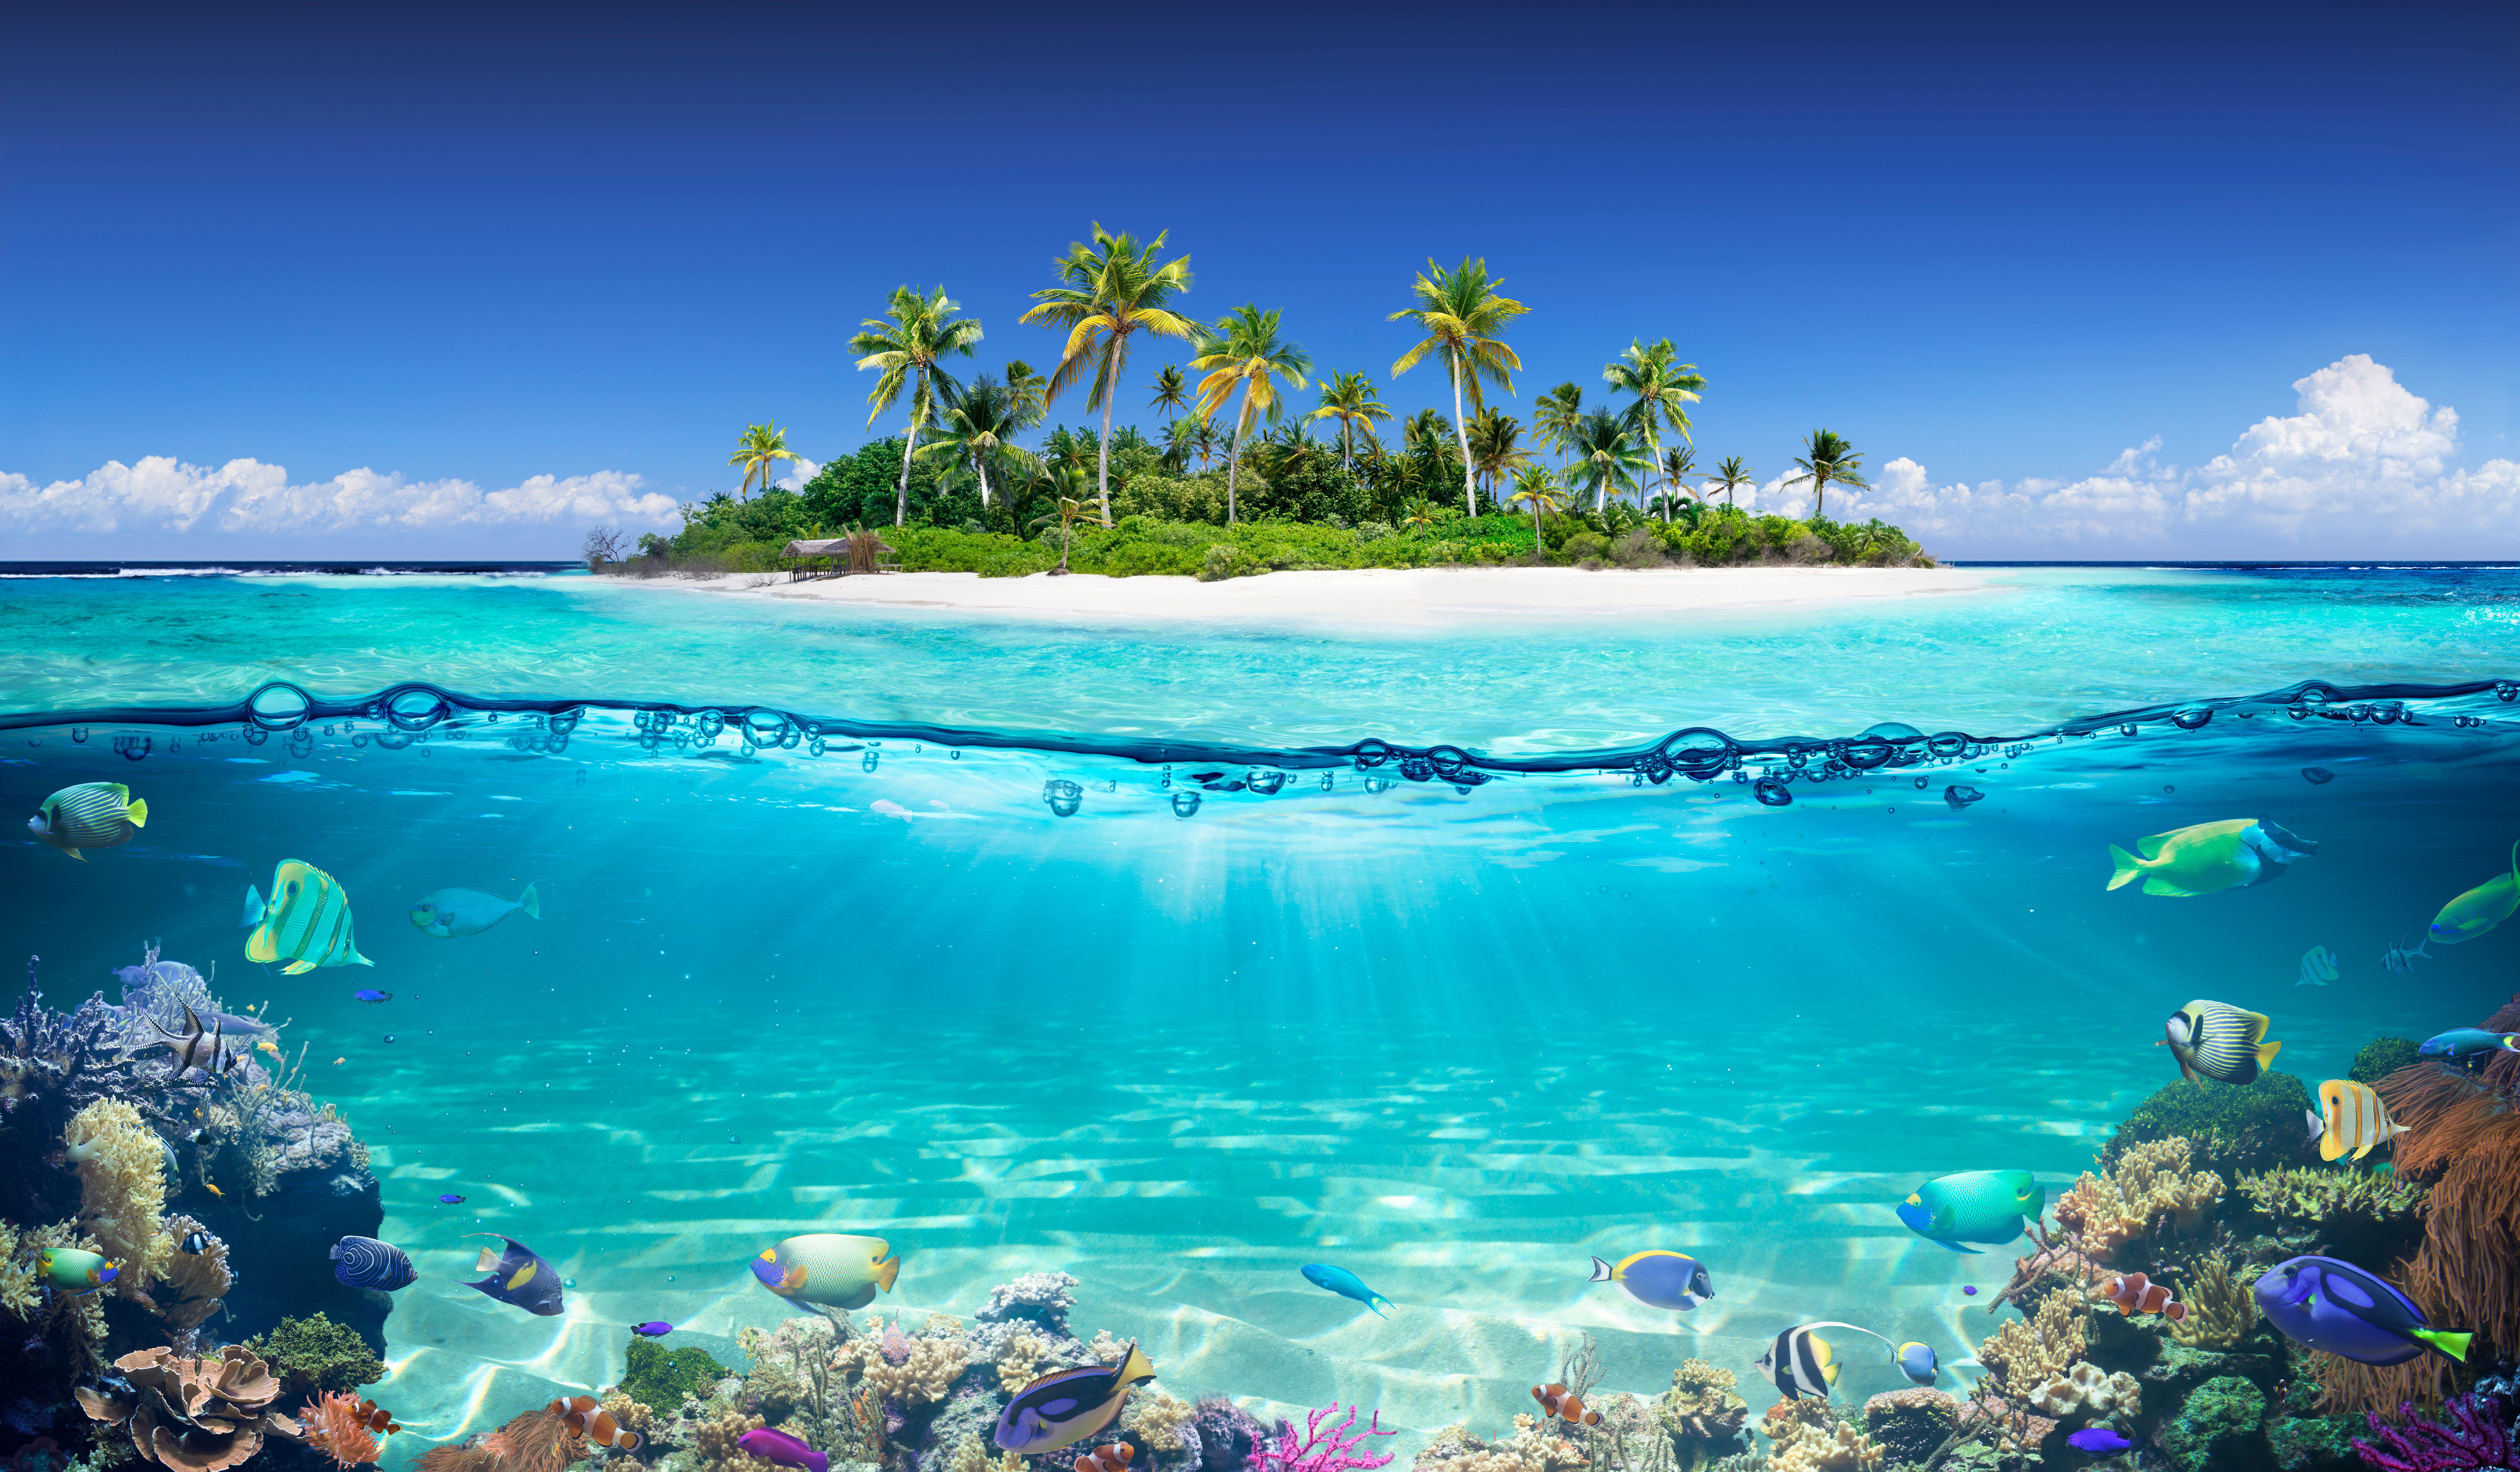 2C1BHY5 Tropical Island And Coral Reef - Split View With Waterline (Alamy/PA)